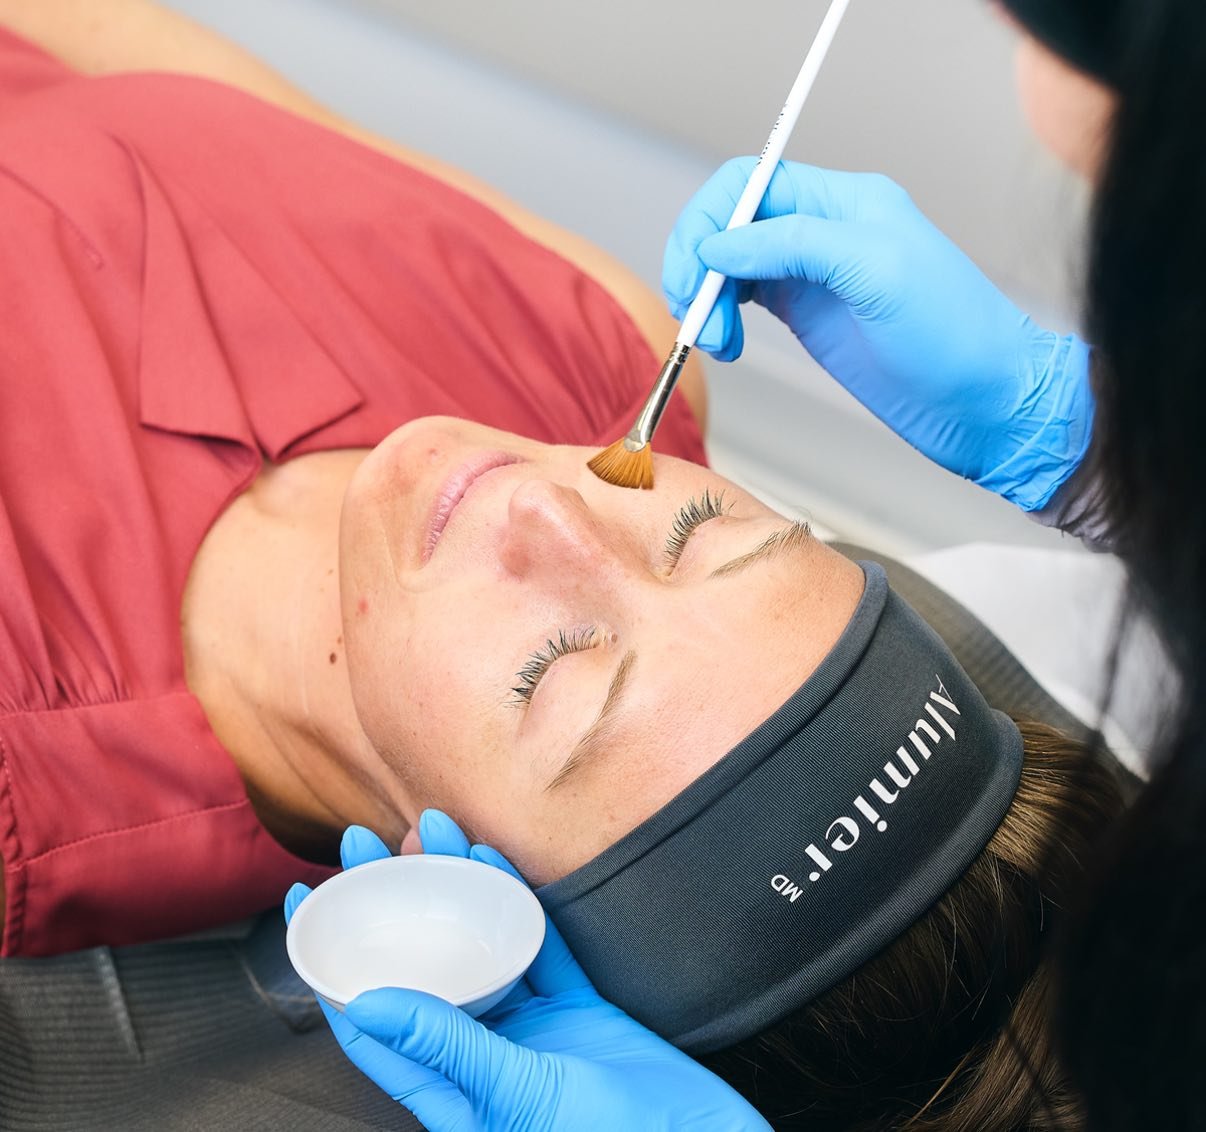 AlumierMD Facial and Chemical Peel Treatment